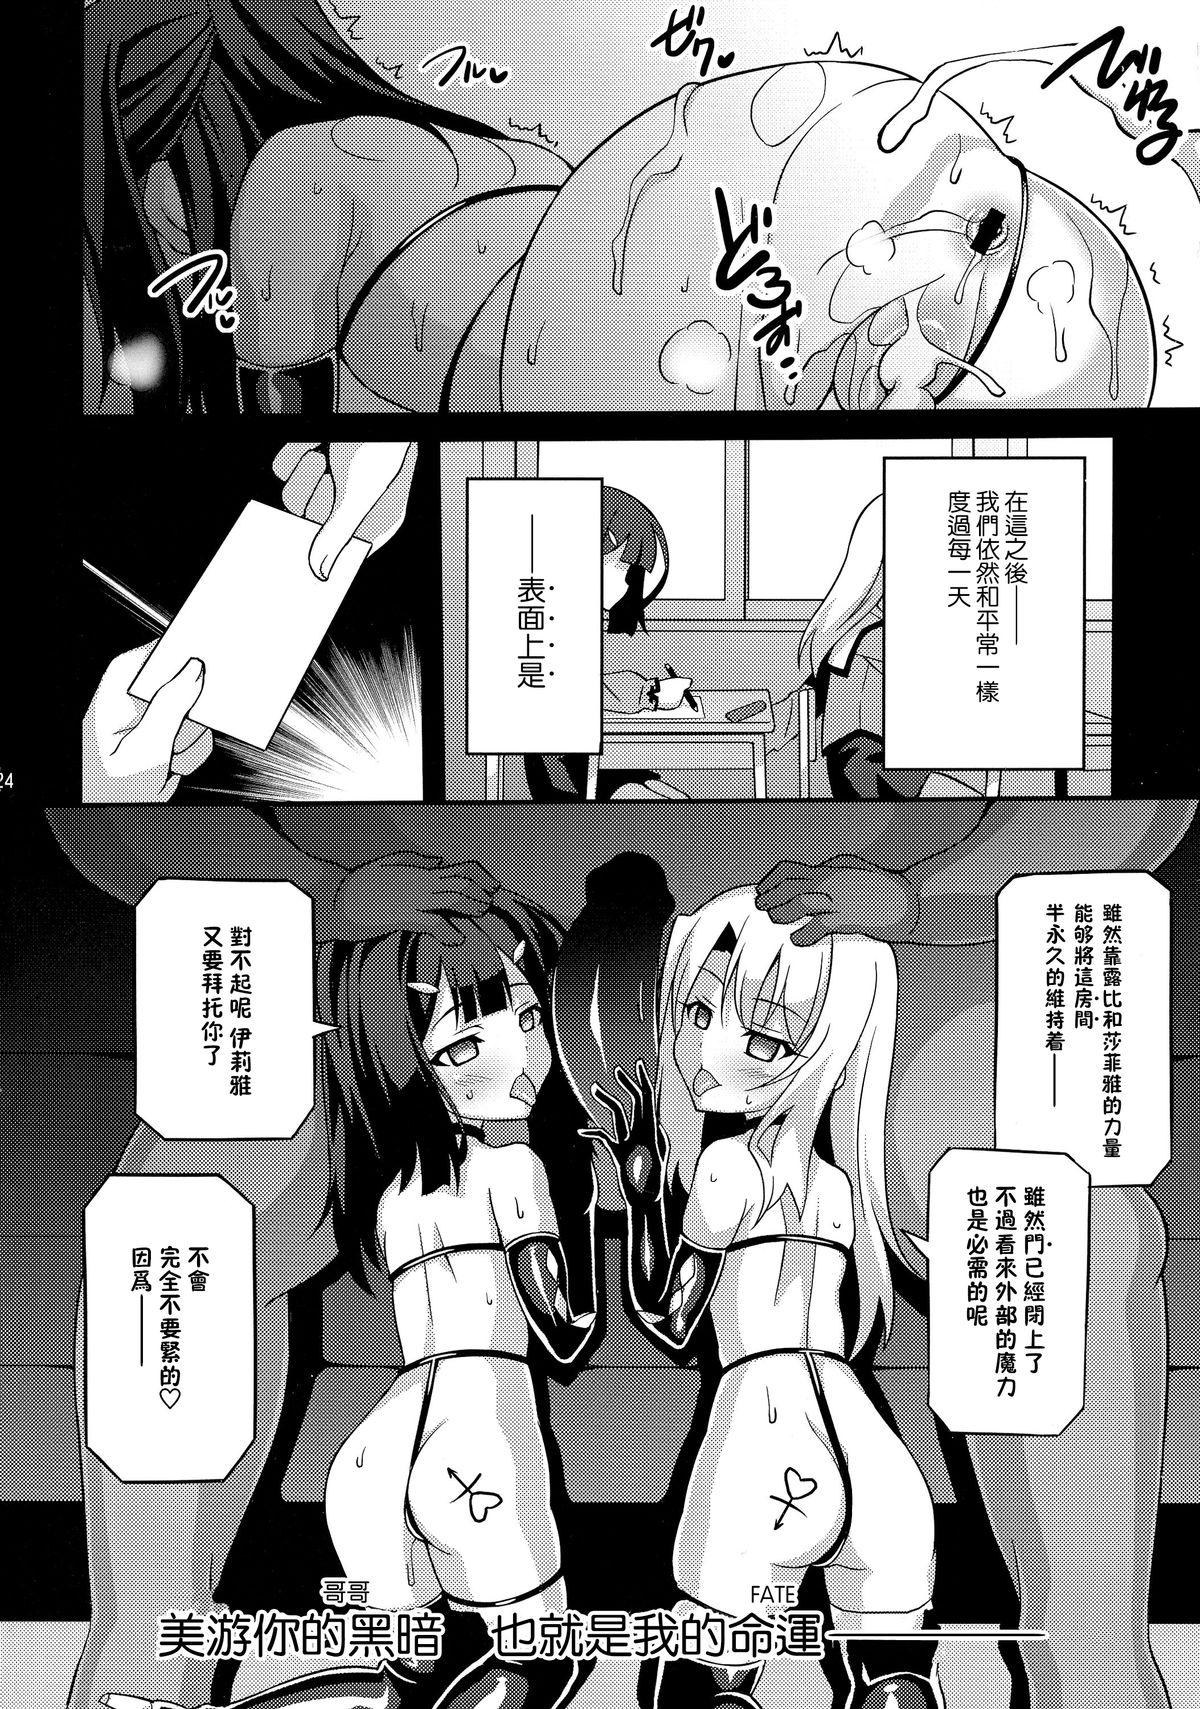 White Girl Datenshi XX EPISODE 2 - Fate kaleid liner prisma illya Pure18 - Page 25